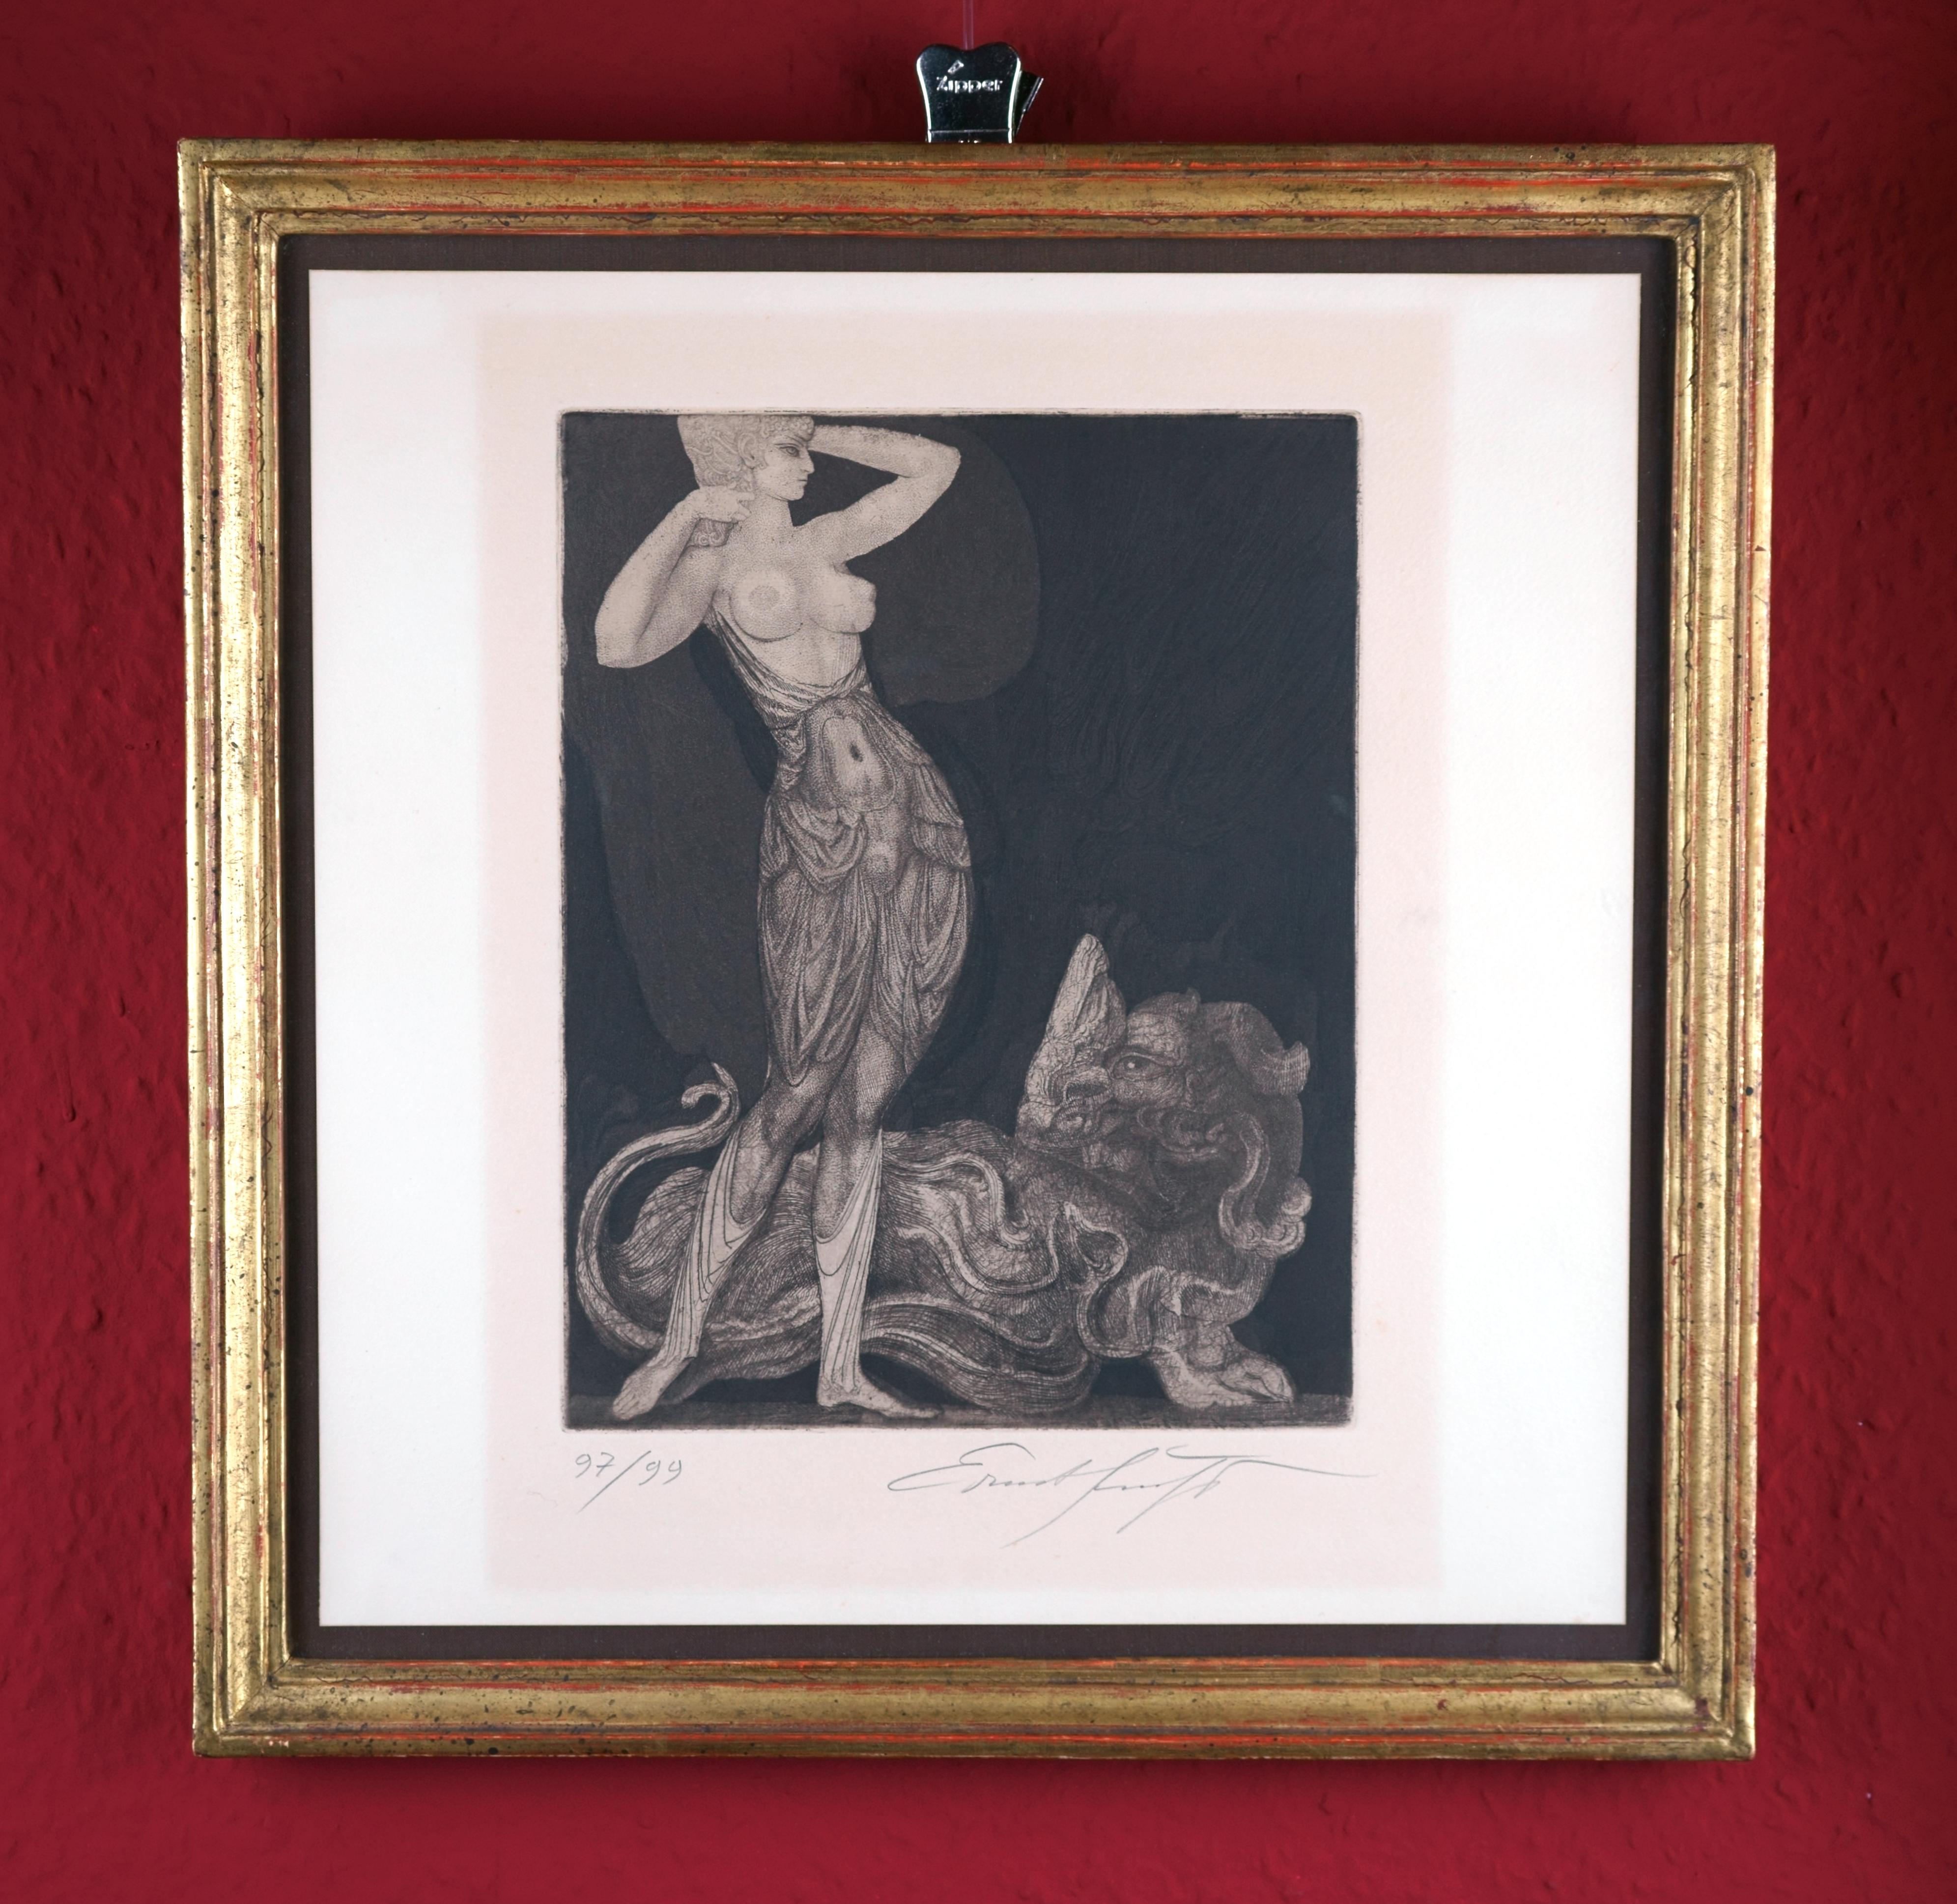 Genius and Animal - Eros and Drive - - Surrealist Print by Ernst Fuchs